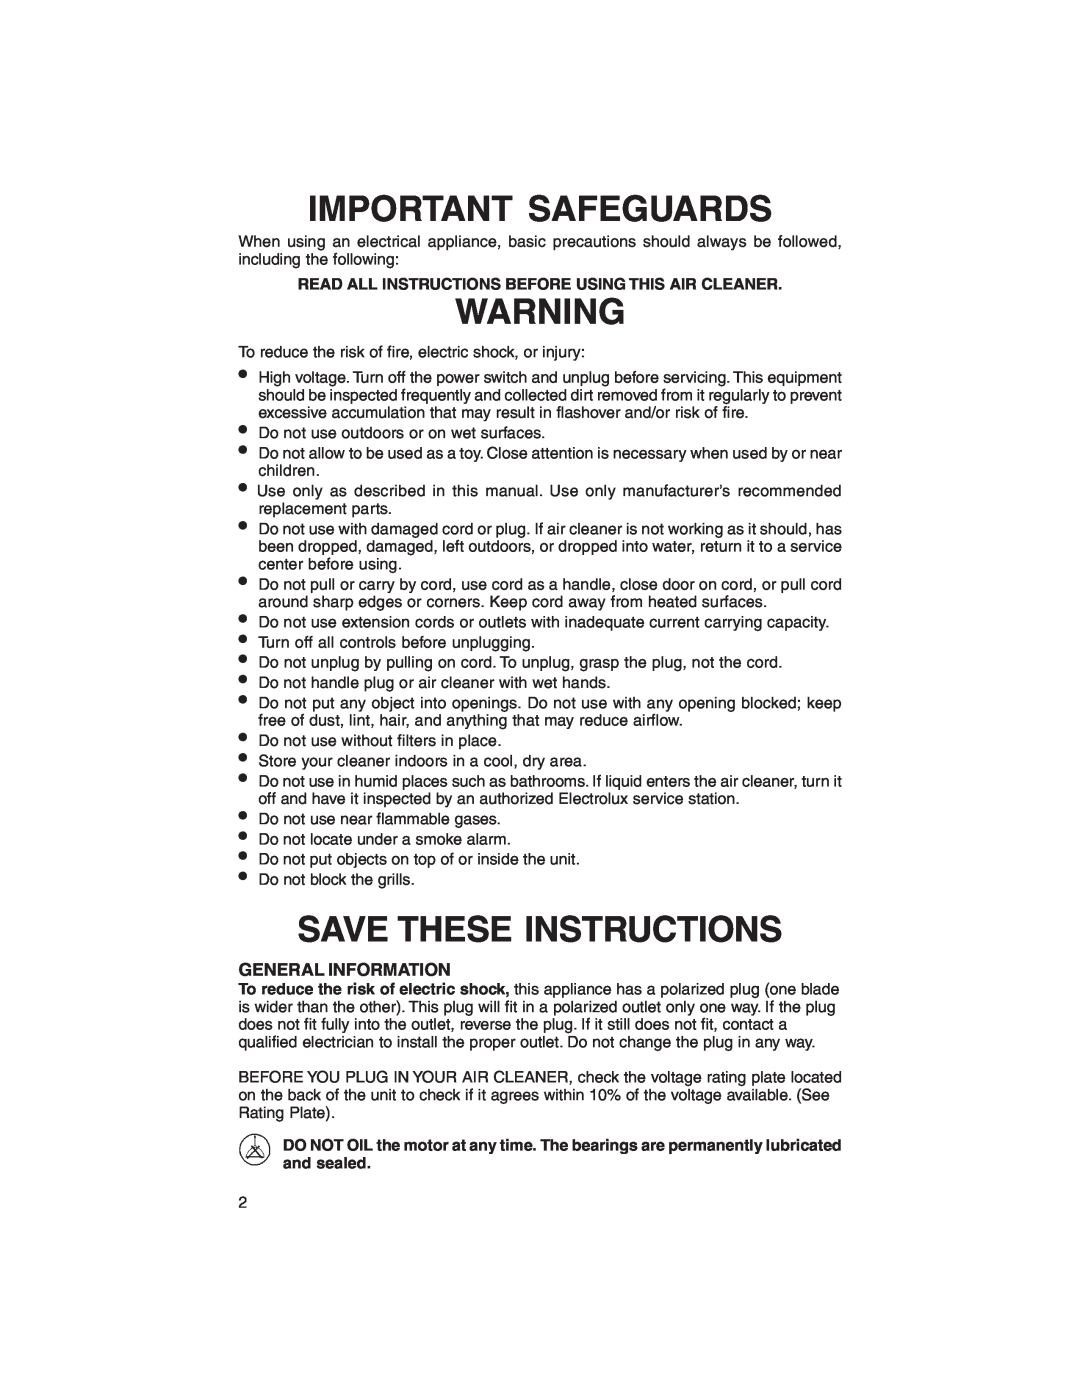 Electrolux Z7040 operating instructions General Information, Important Safeguards, Save These Instructions 